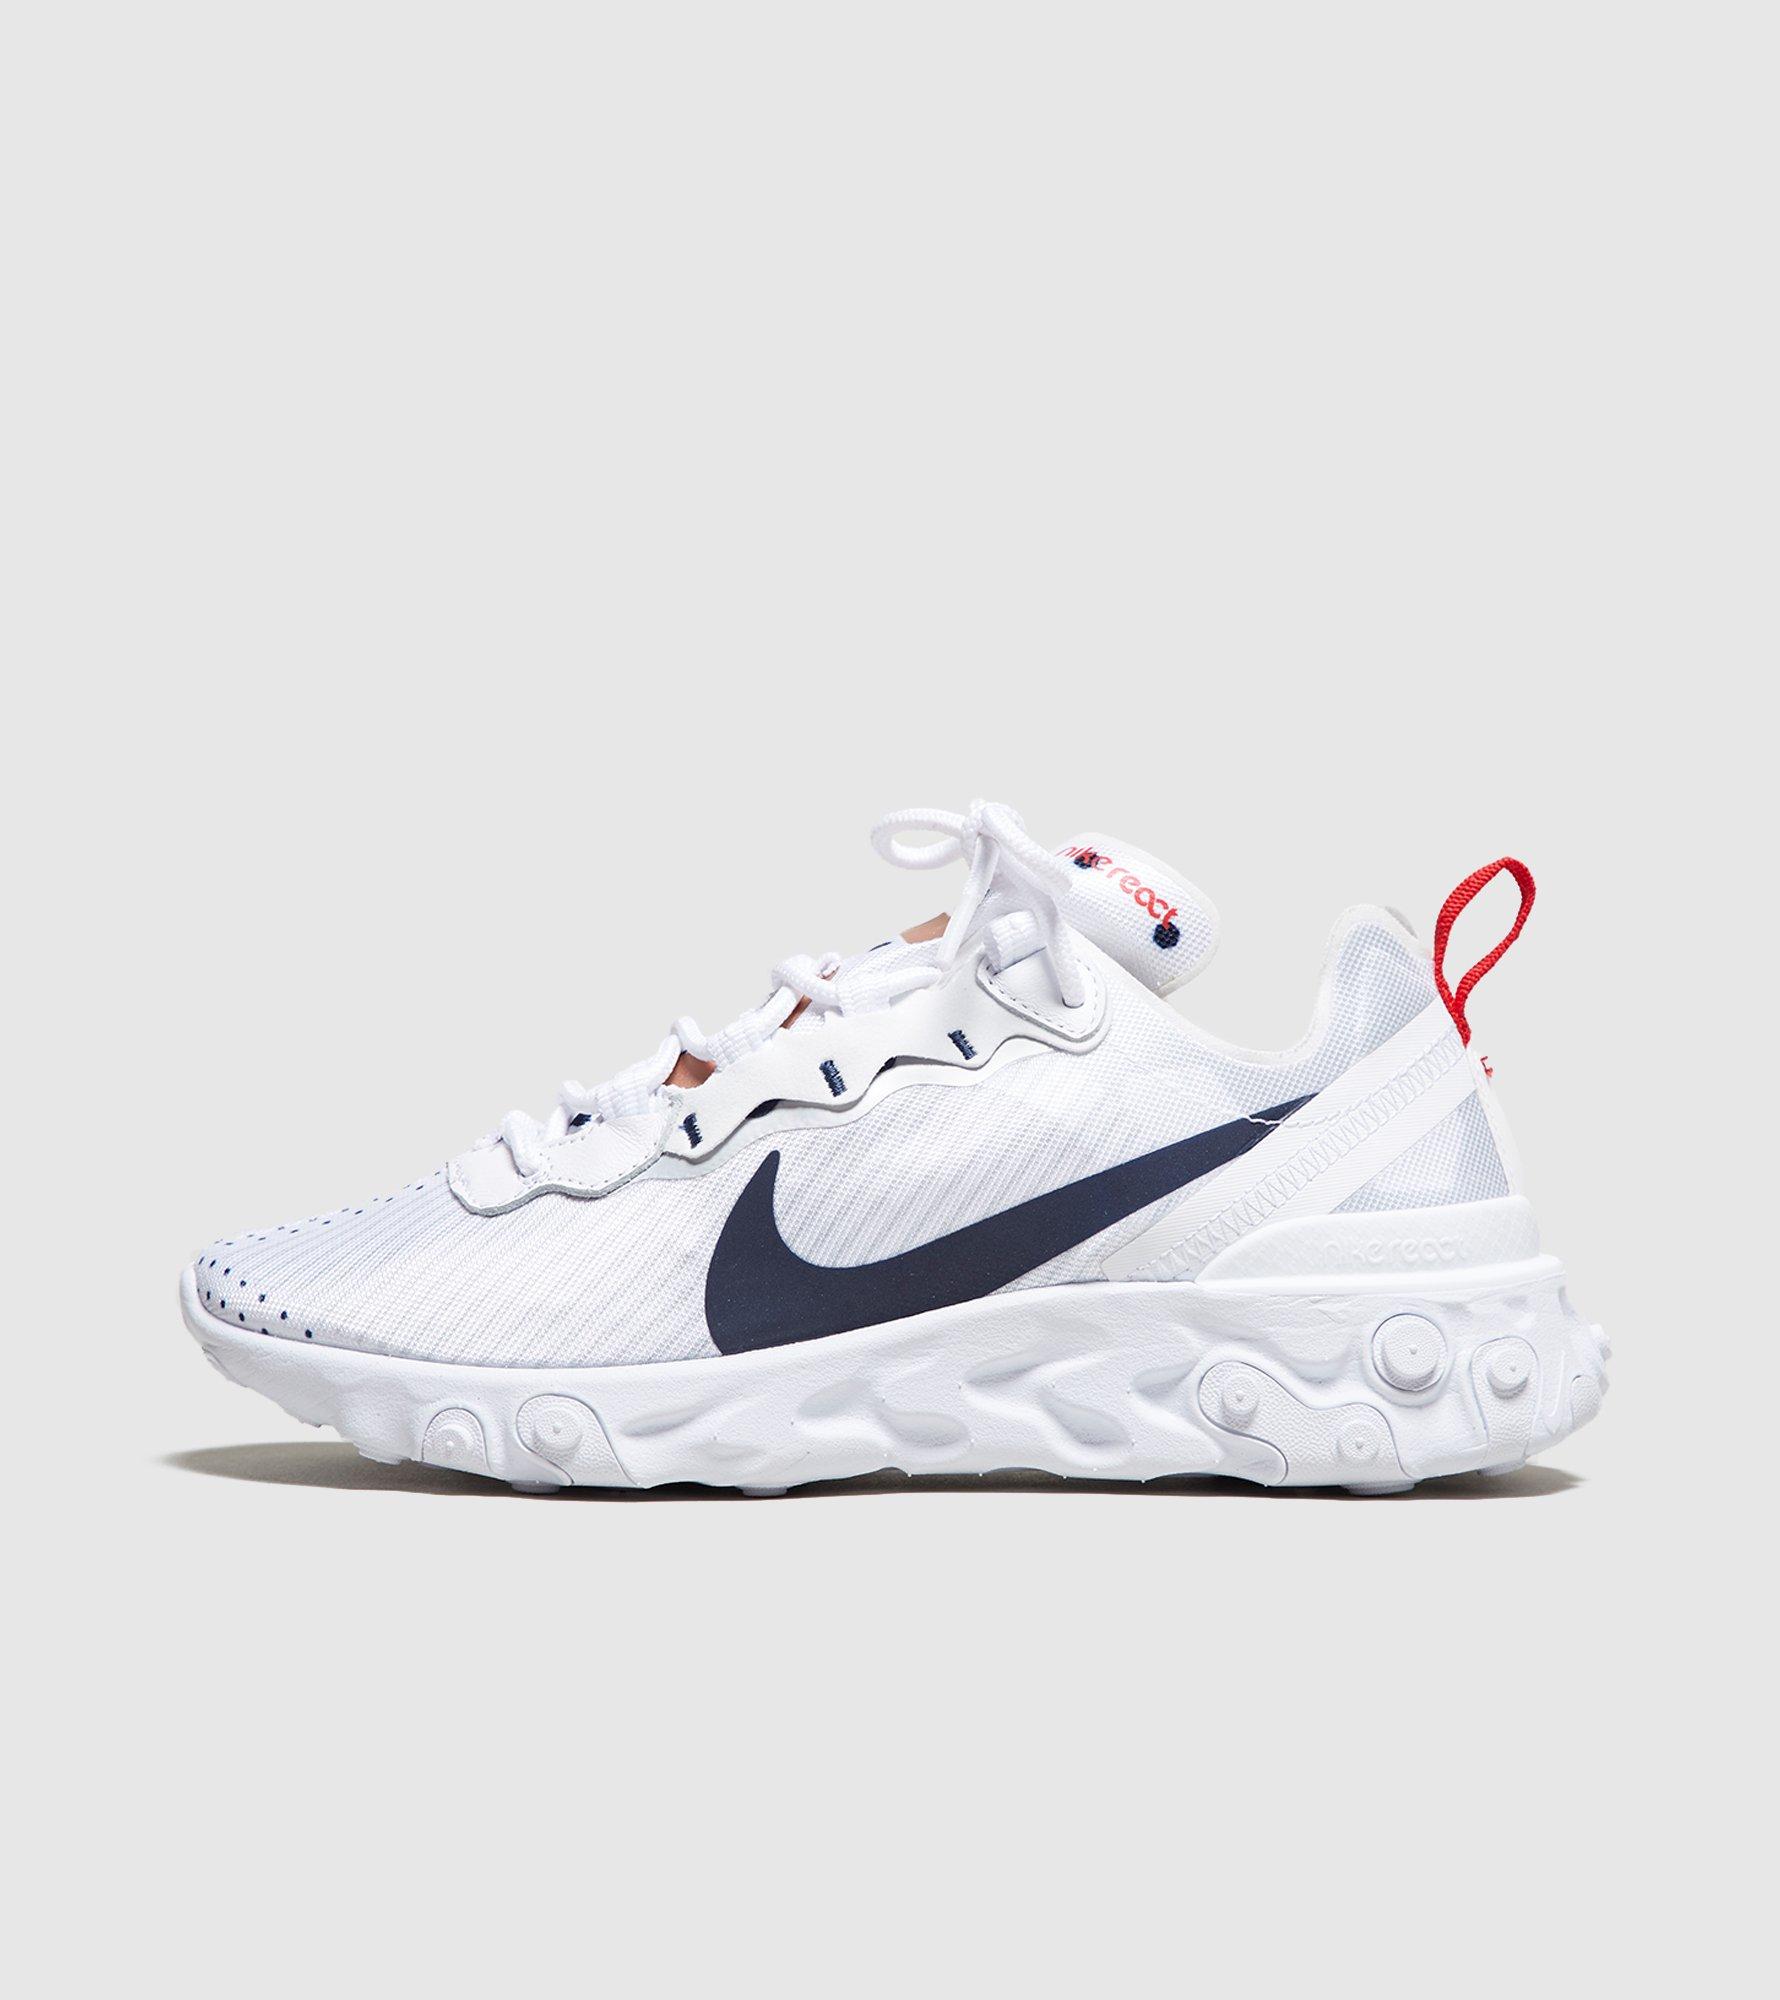 transferencia de dinero mientras tanto Prominente size? on Twitter: "The @Nike React Element 55 Unite Totale. Available  online and in selected size? stores - #sizeHQ Shop now:  https://t.co/NBMOIcAE5F https://t.co/k5LTbXtvl5" / Twitter